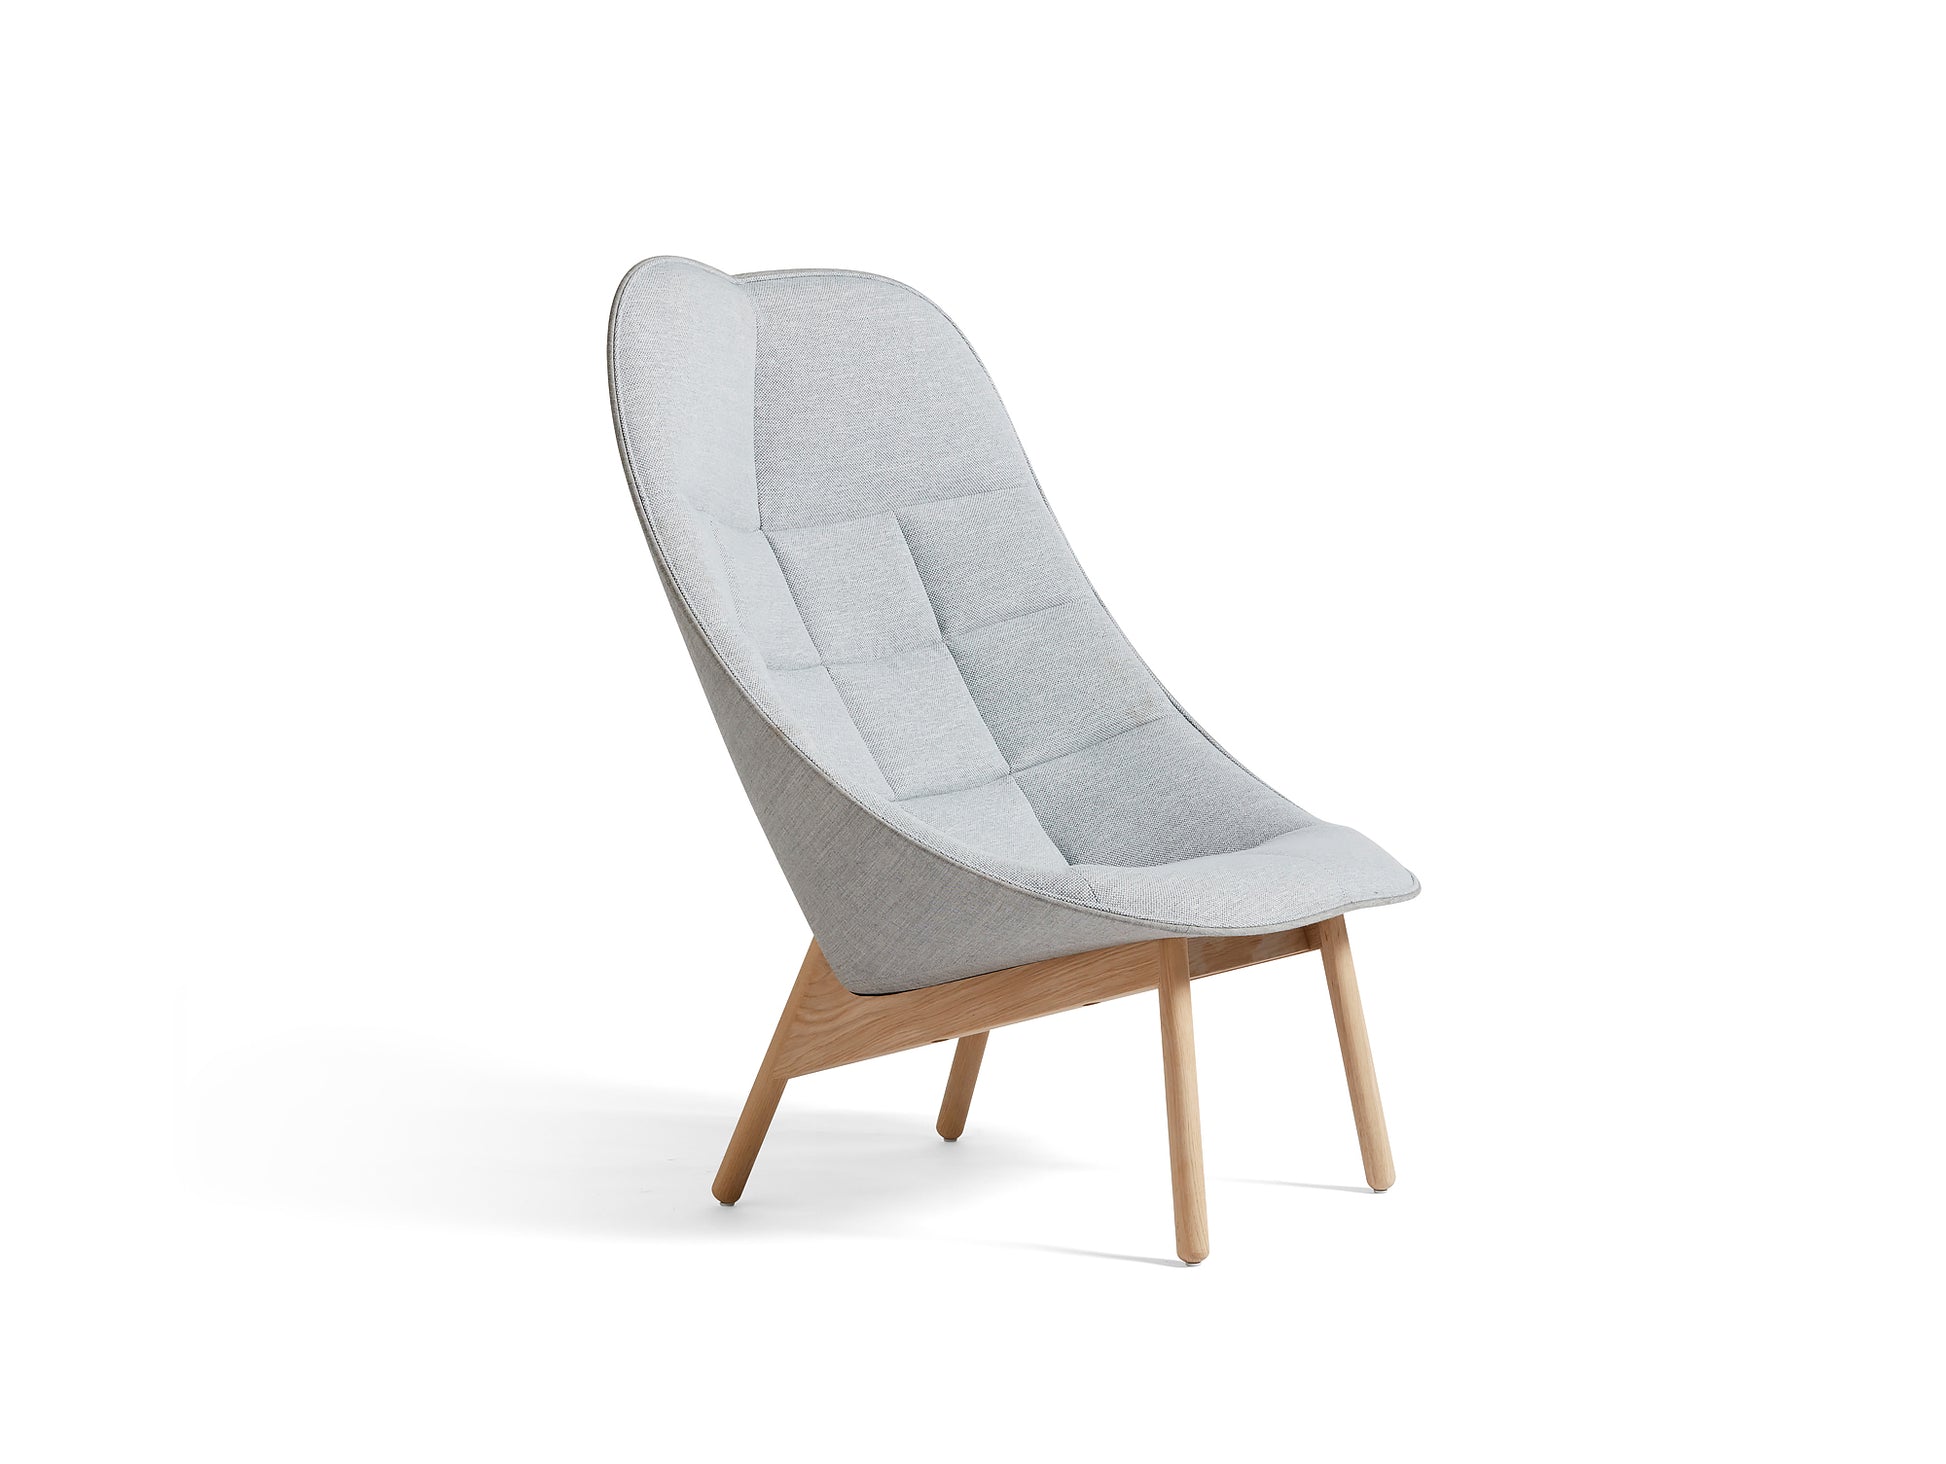 Uchiwa Quilted Lounge Chair / Mode 002 Front / Remix 123 Back / by HAY